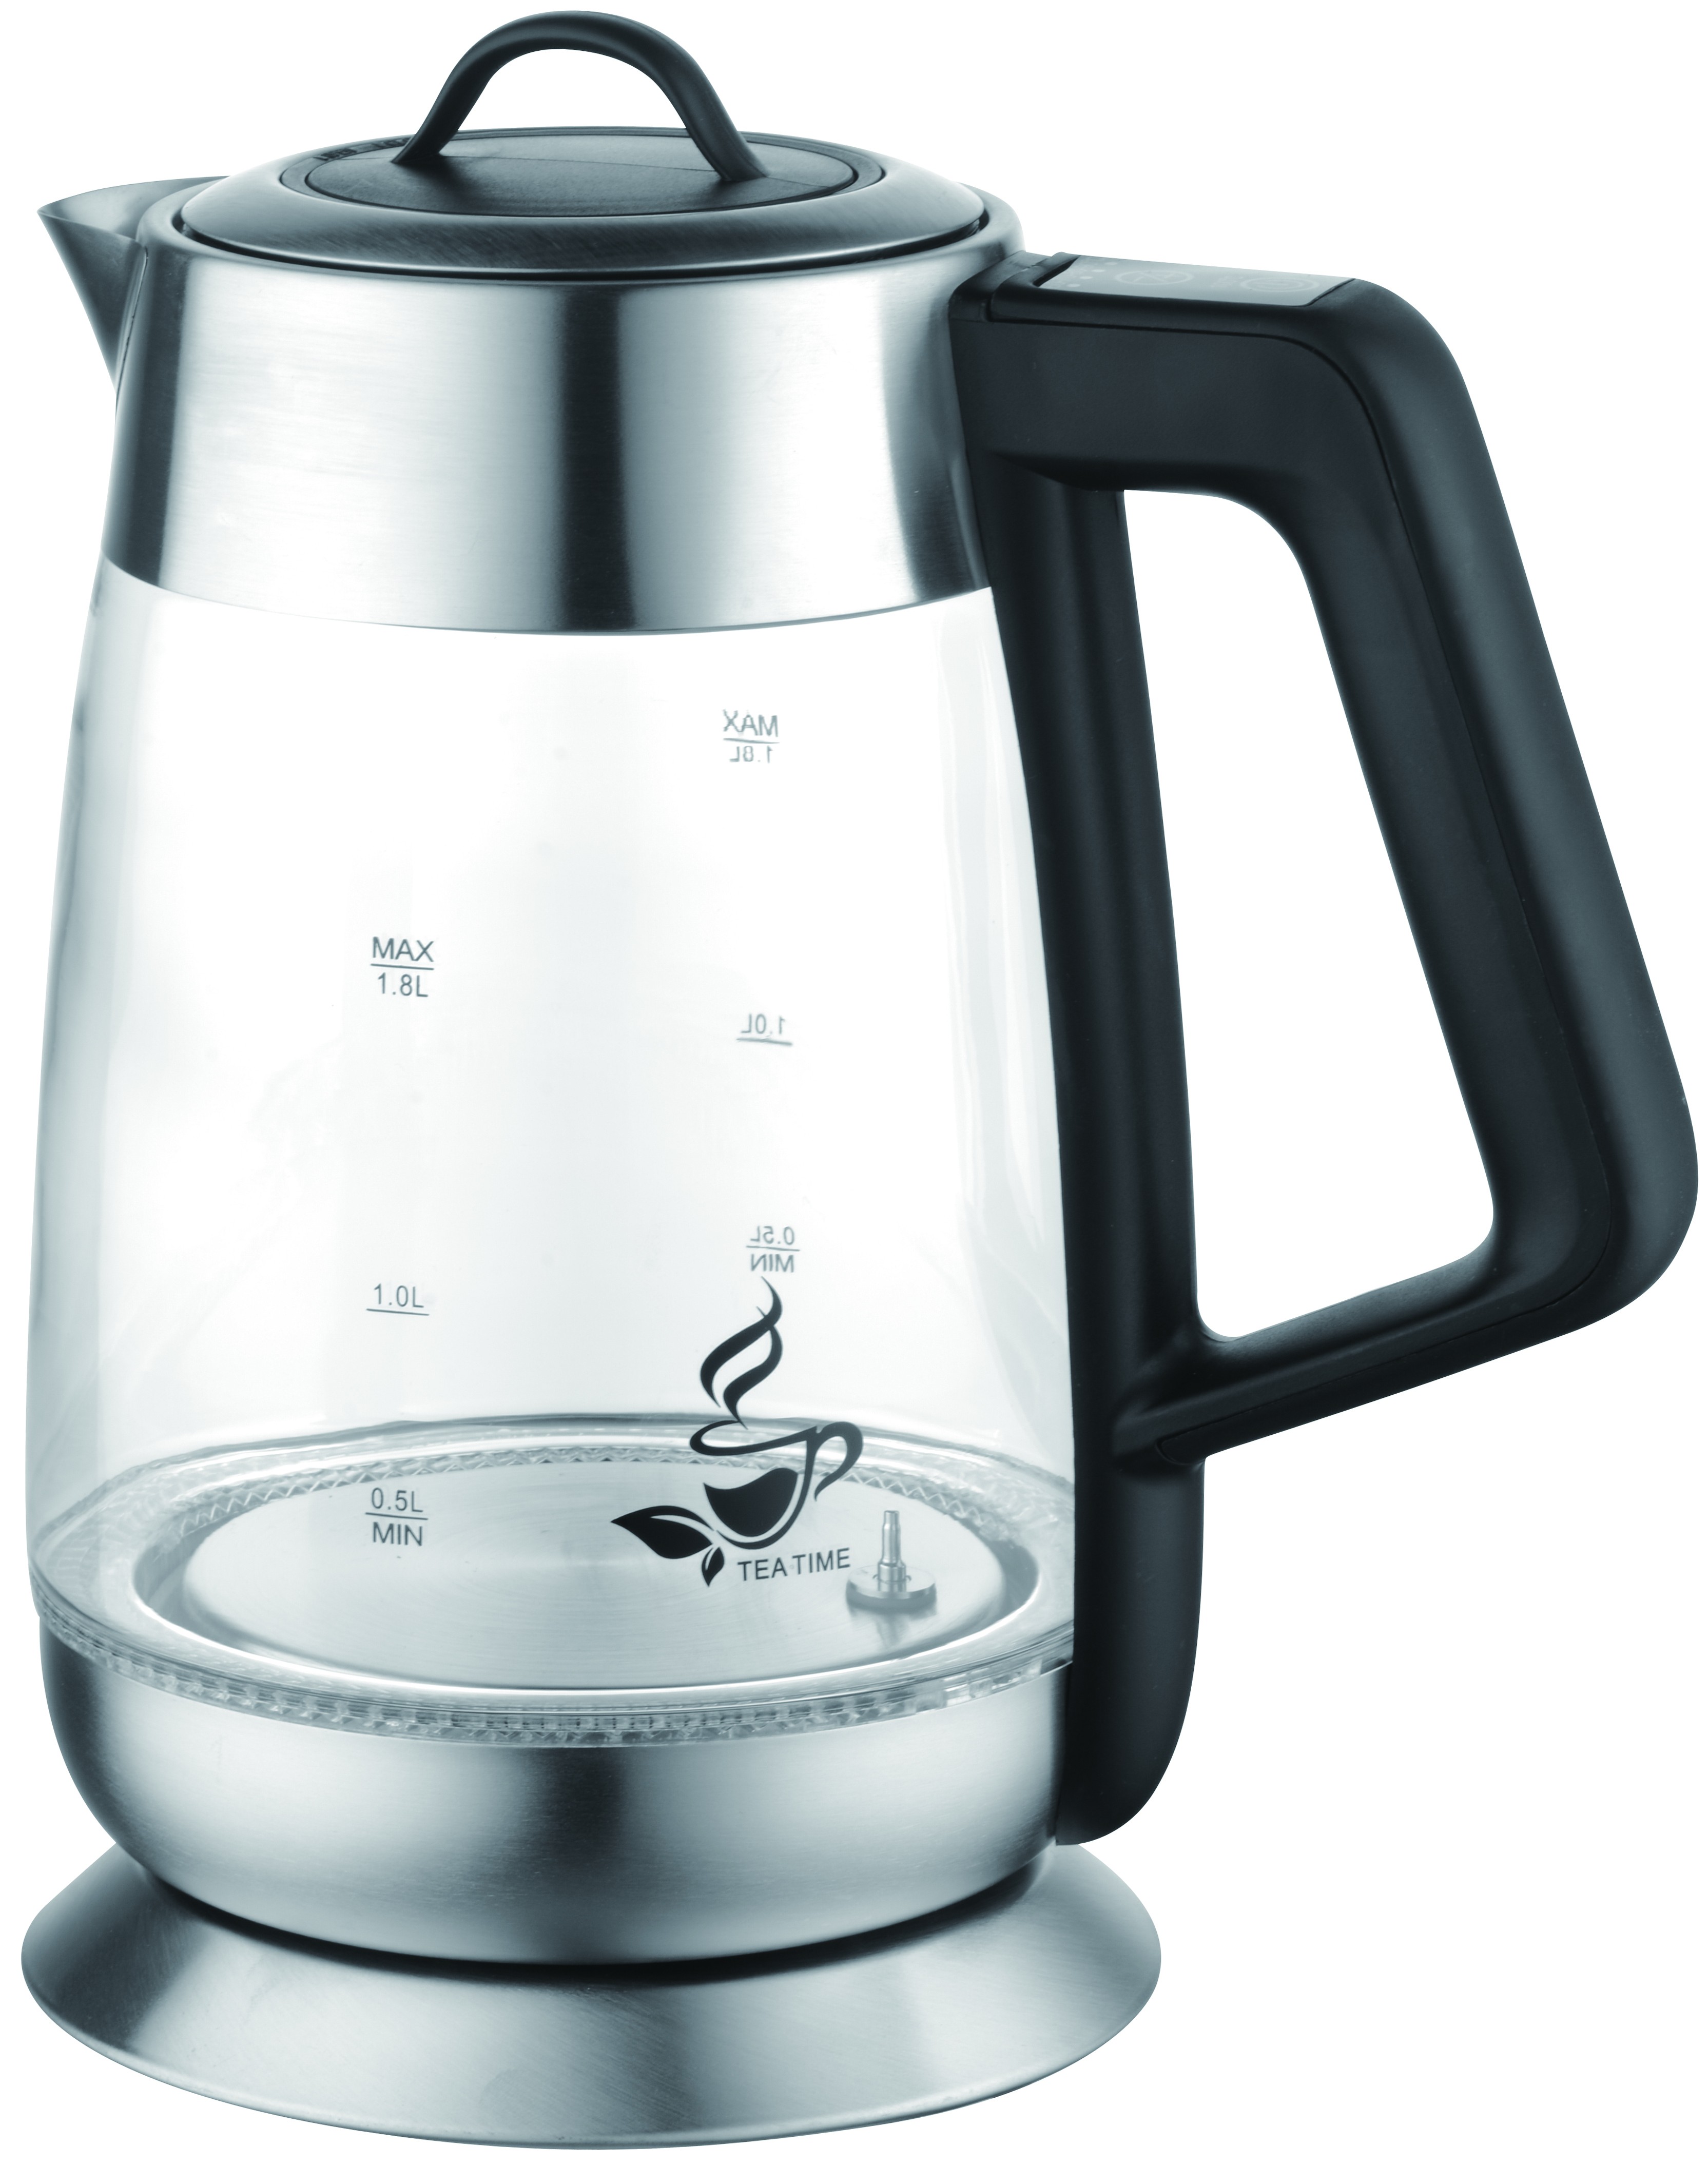 Digital Glass Kettle with Tea Infuser